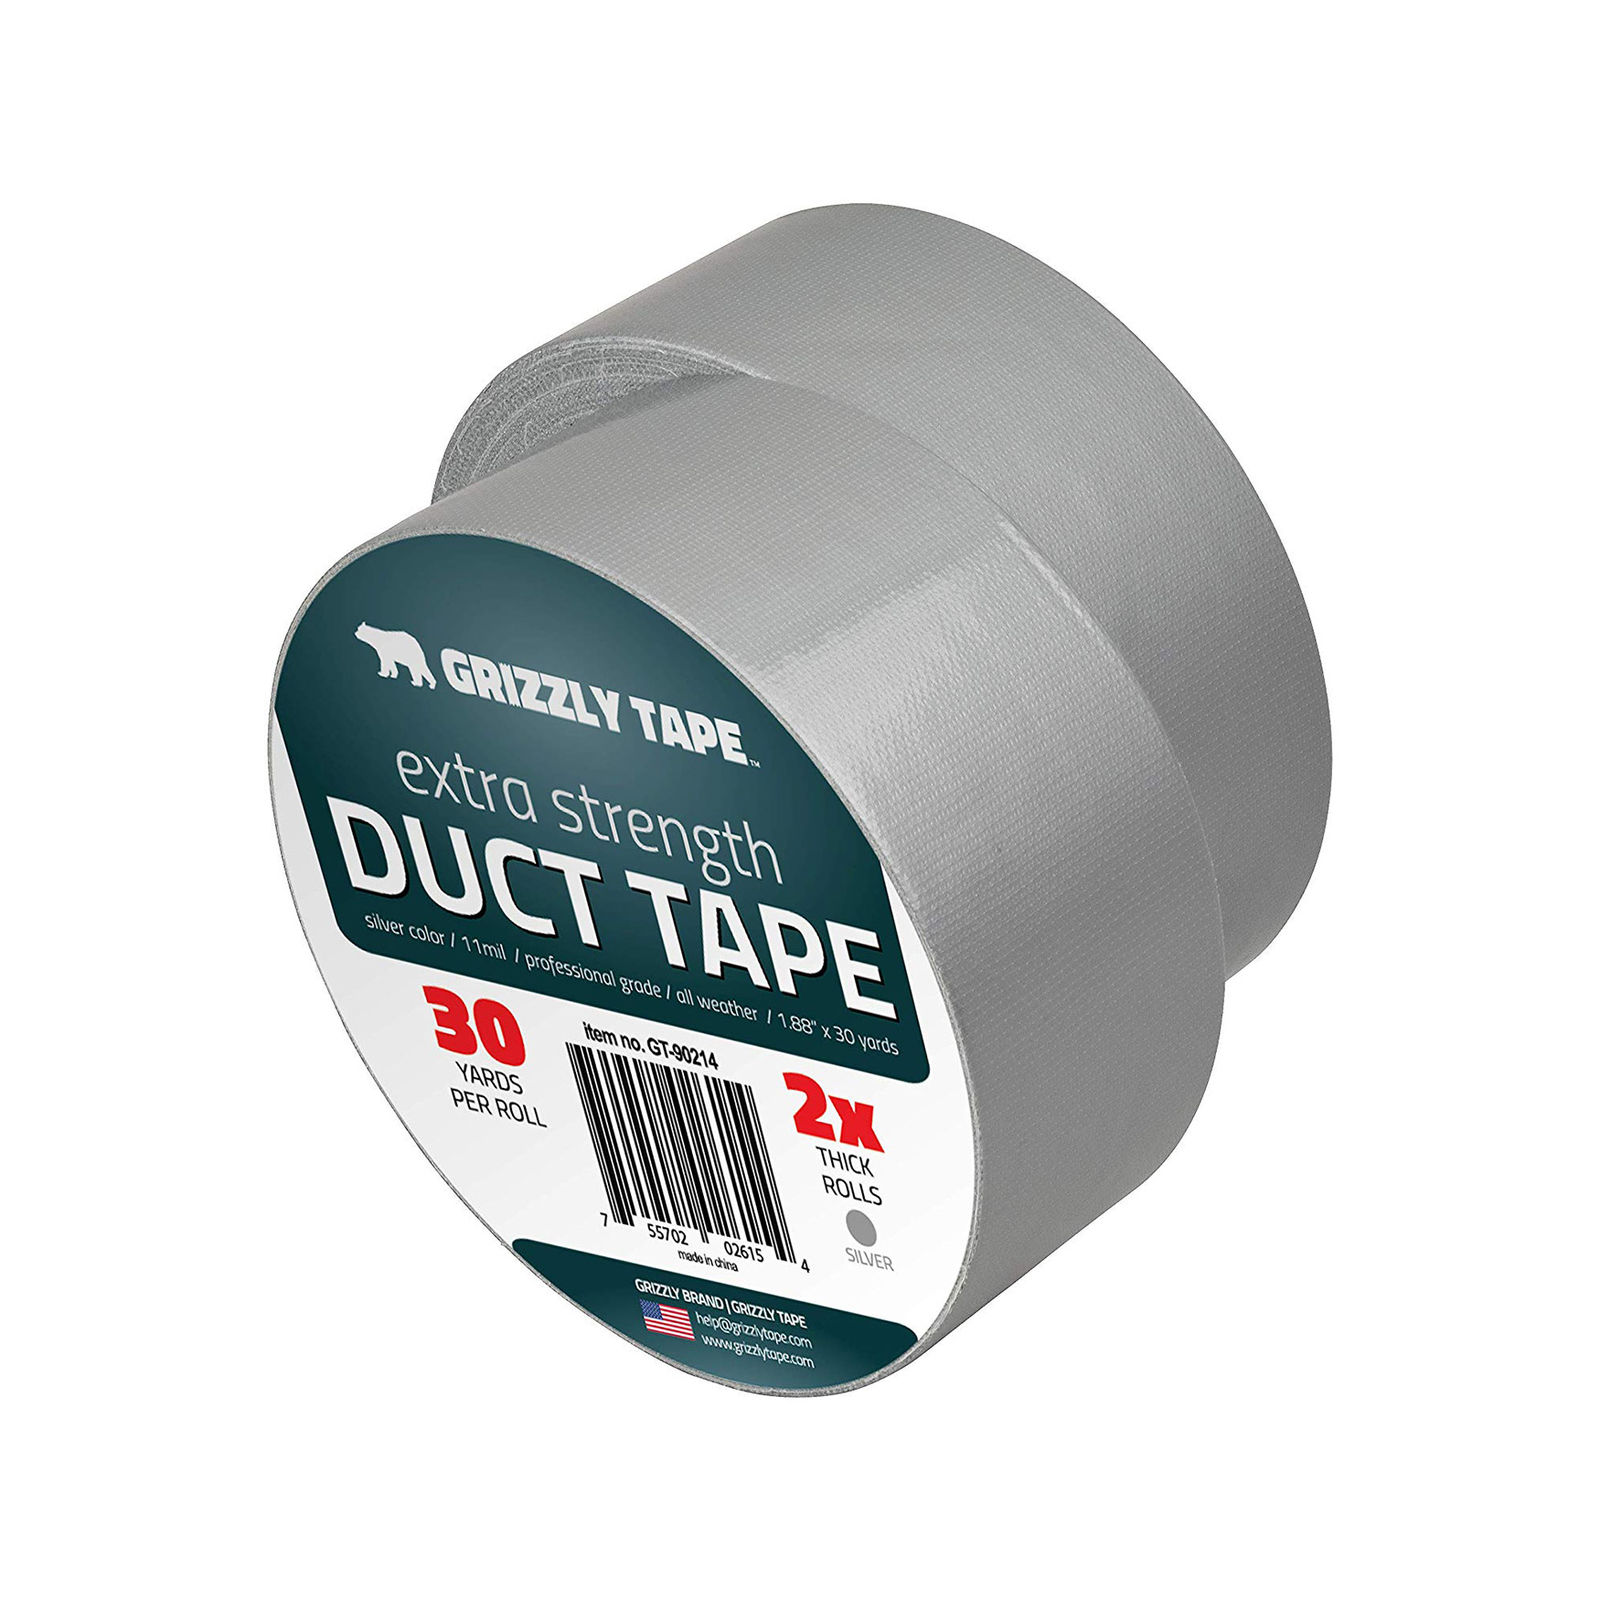 Prodec PTDT50 Silver Duct Tape Masking Tape 2